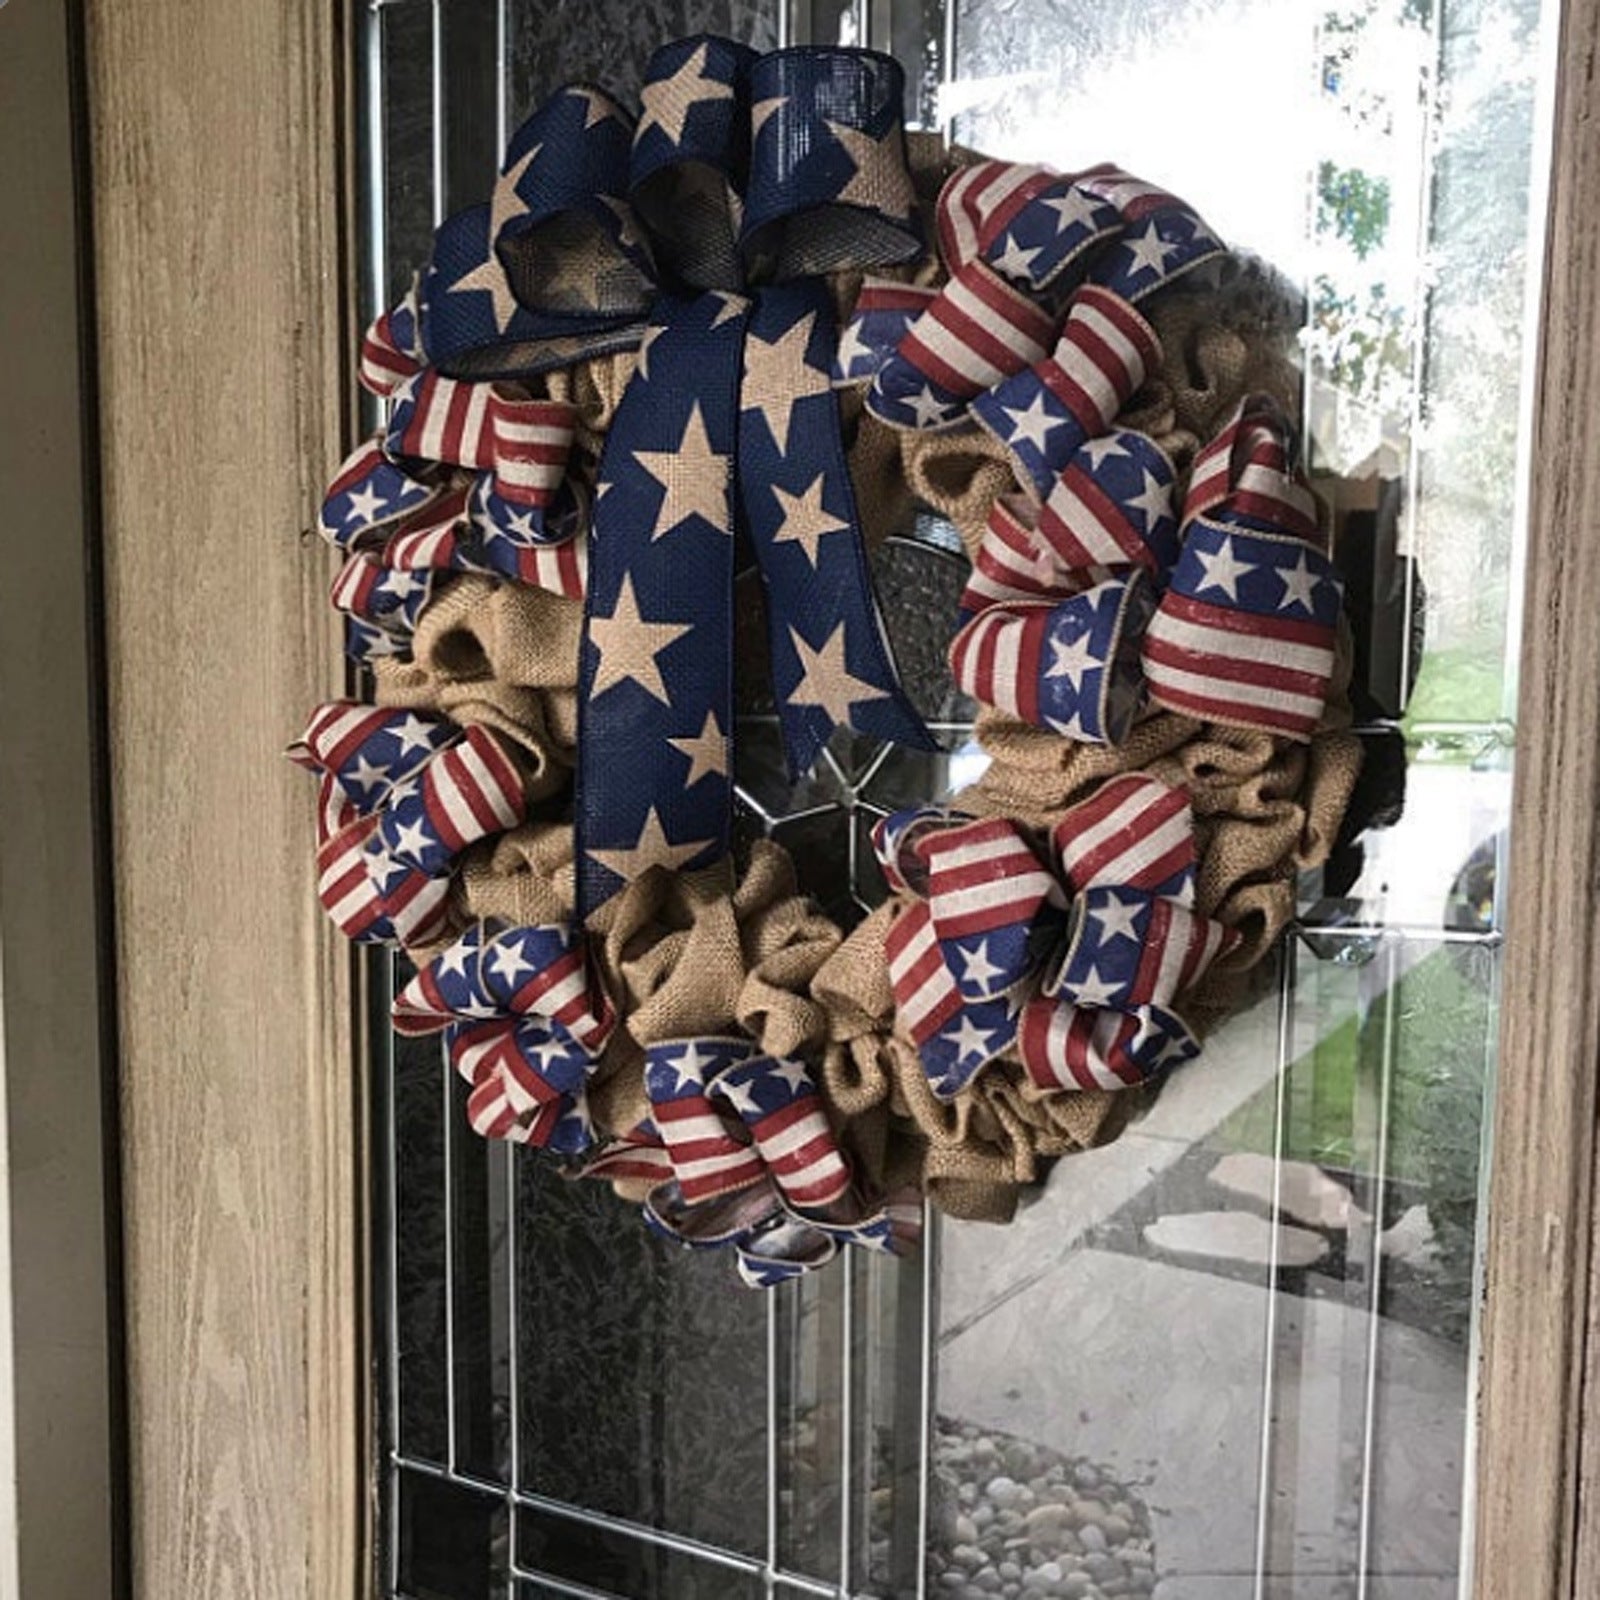 Independence Day Garland 30CM 40CM Door Hanging Home Fabric Decoration, 4th of July decorations, American flag decorations, Patriotic decorations, Red, white and blue decorations, July 4th wreaths, July 4th garlands, July 4th centerpieces